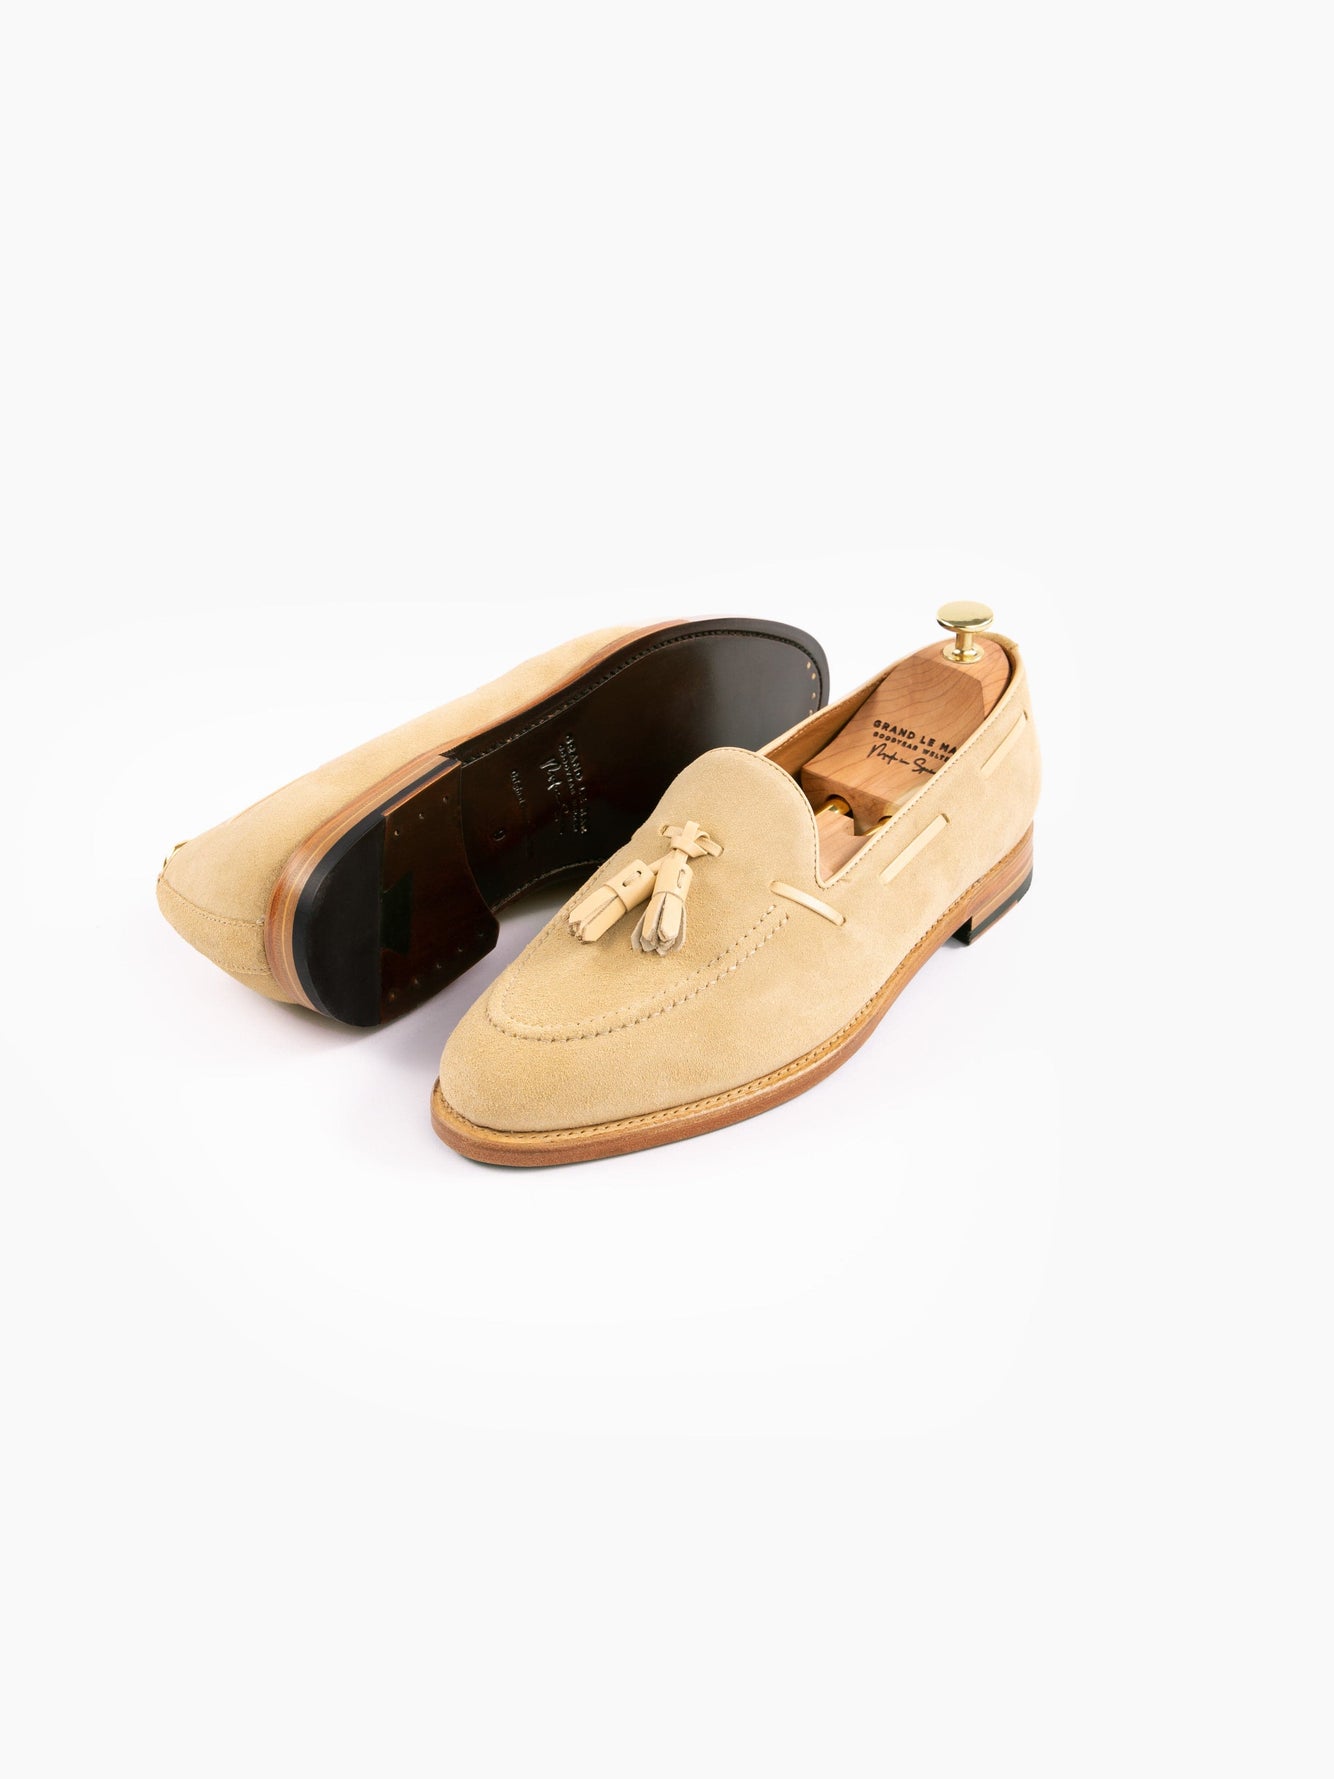 Tassel Loafers Sand Suede - Grand Le Mar